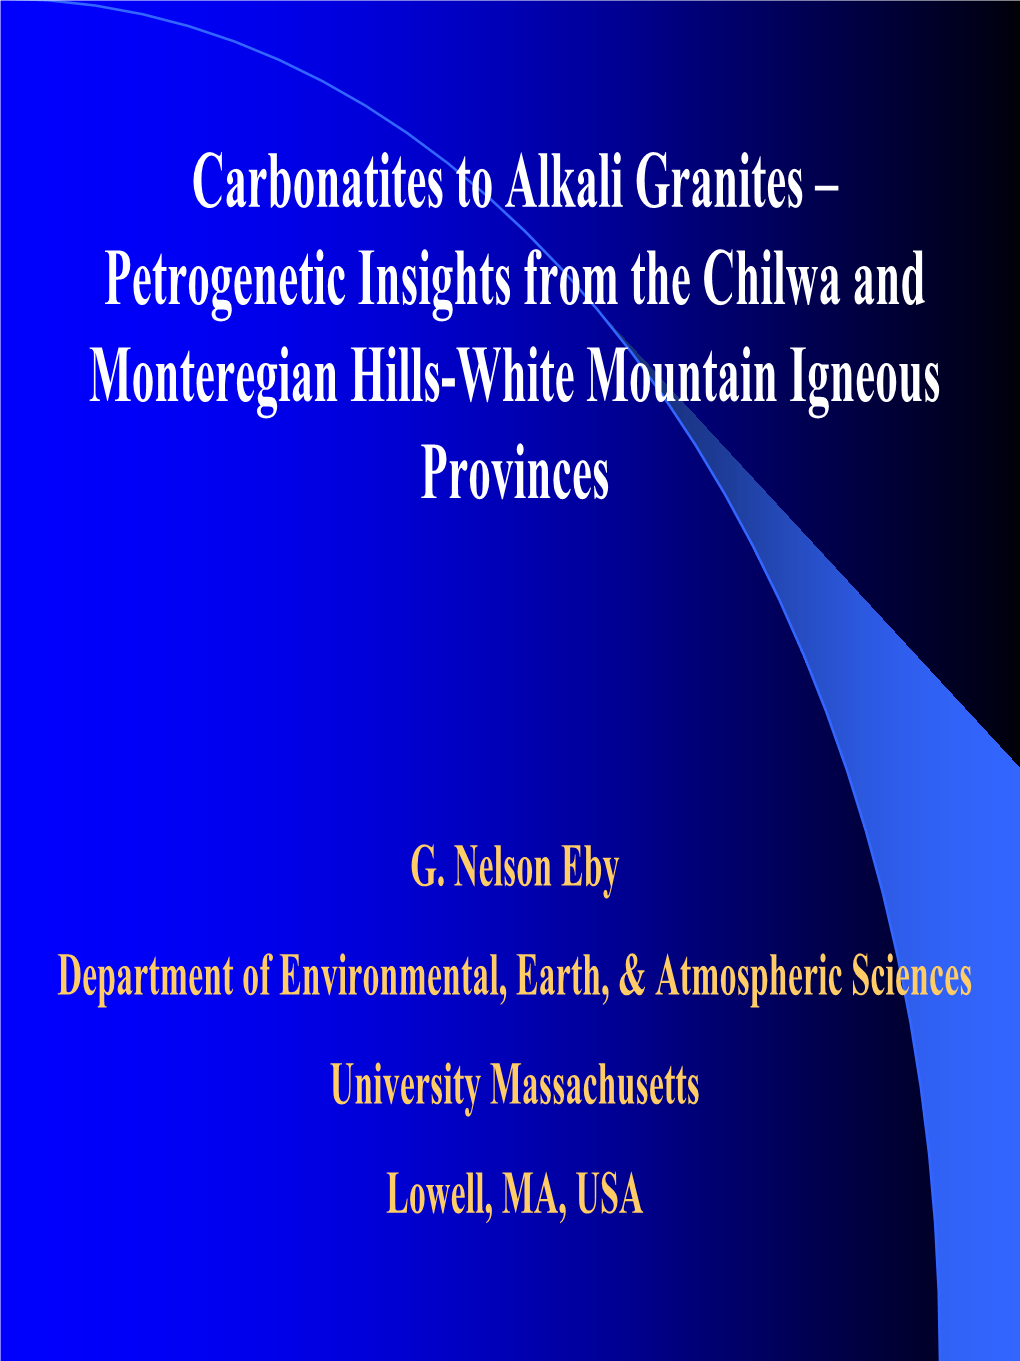 Petrogenetic Insights from the Chilwa and Monteregian Hills-White Mountain Igneous Provinces